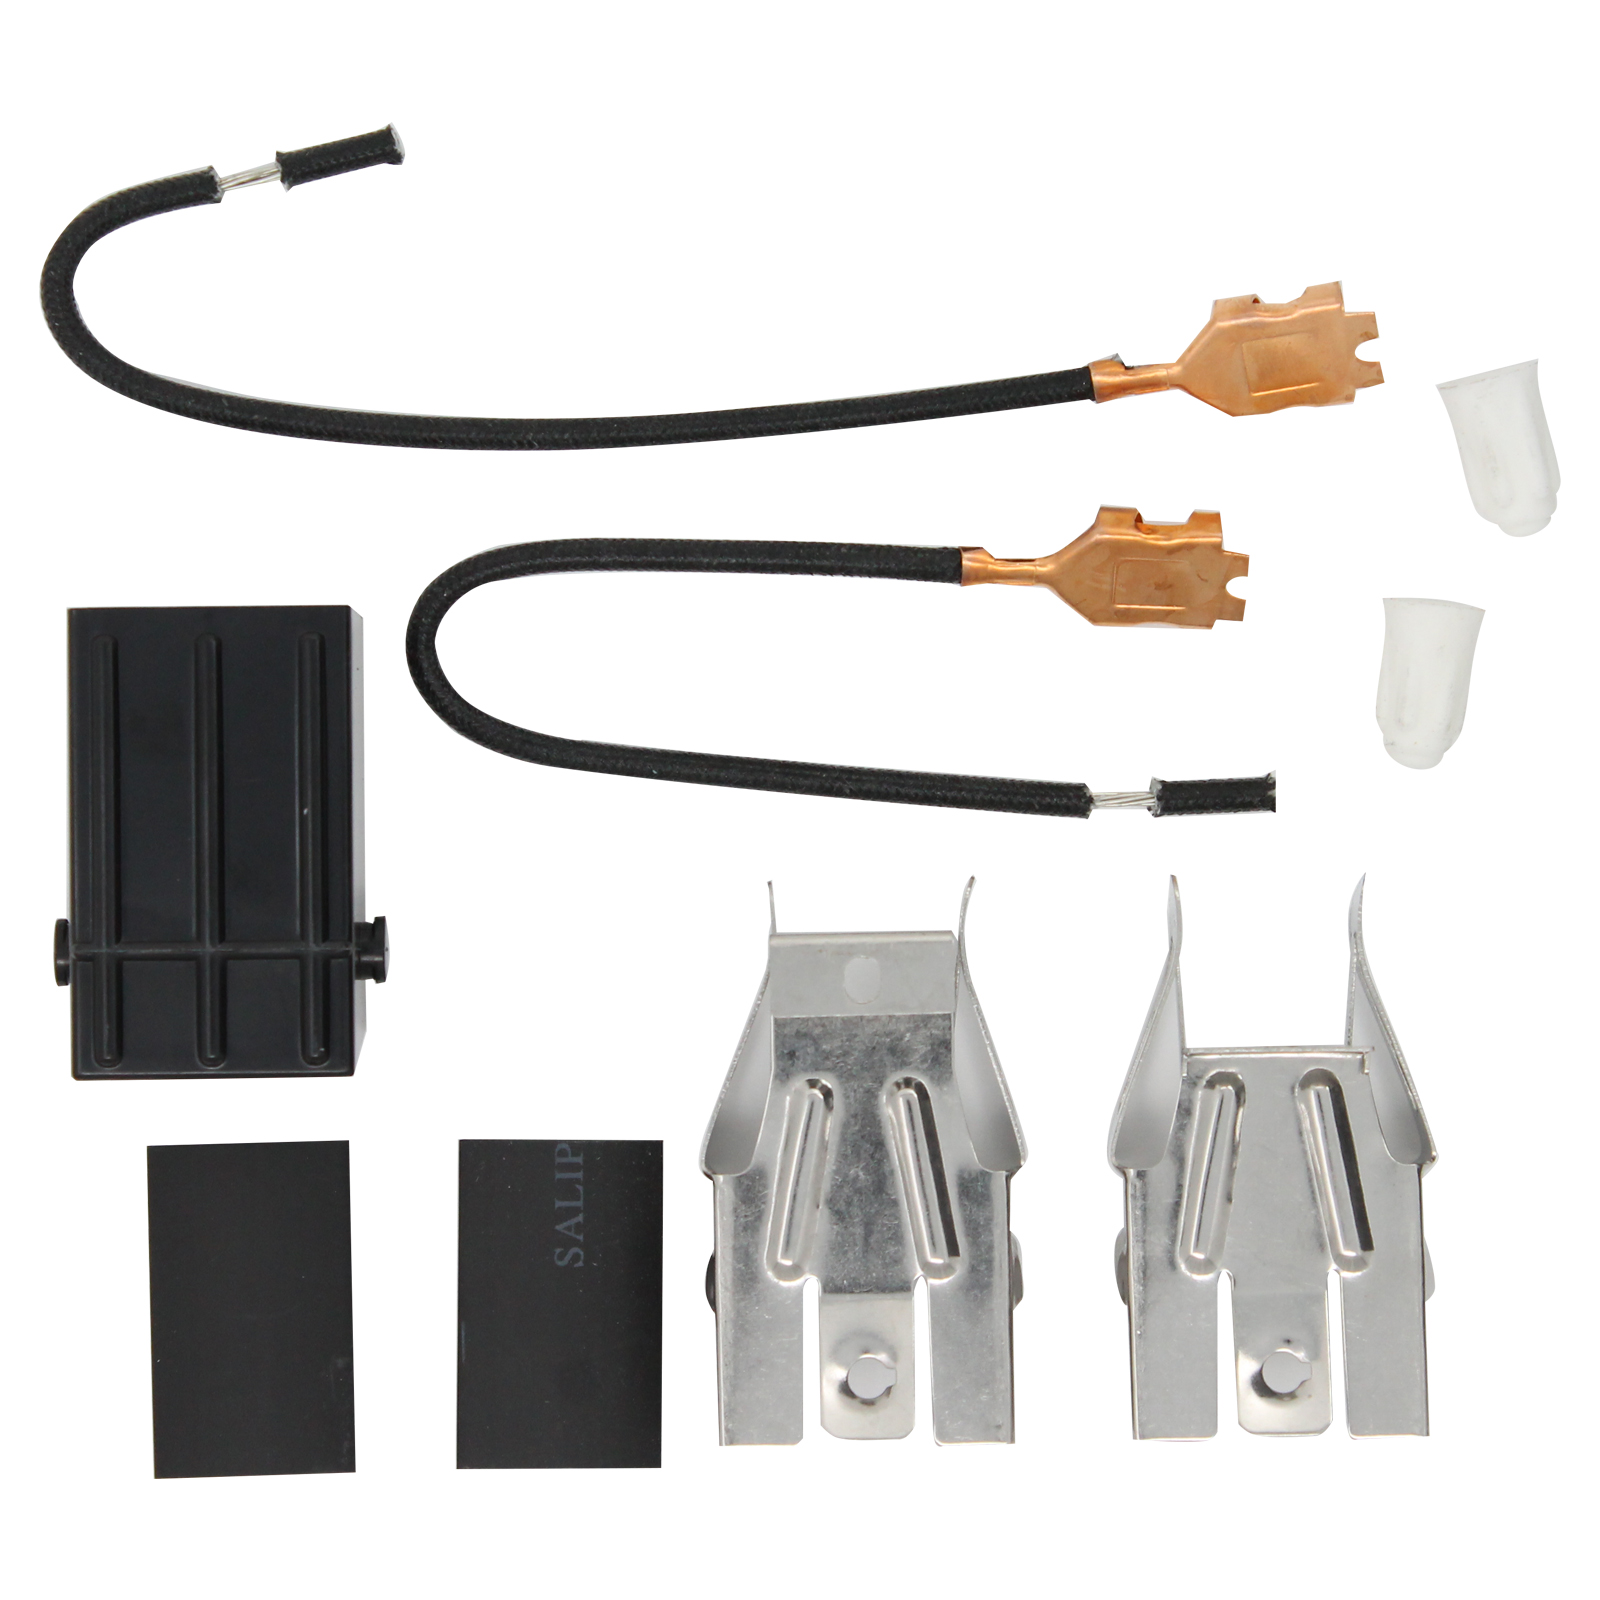 330031 Top Burner Receptacle Kit Replacement for Roper FES310YW1 Range/Cooktop/Oven - Compatible with 330031 Range Burner Receptacle Kit - UpStart Components Brand - image 2 of 4